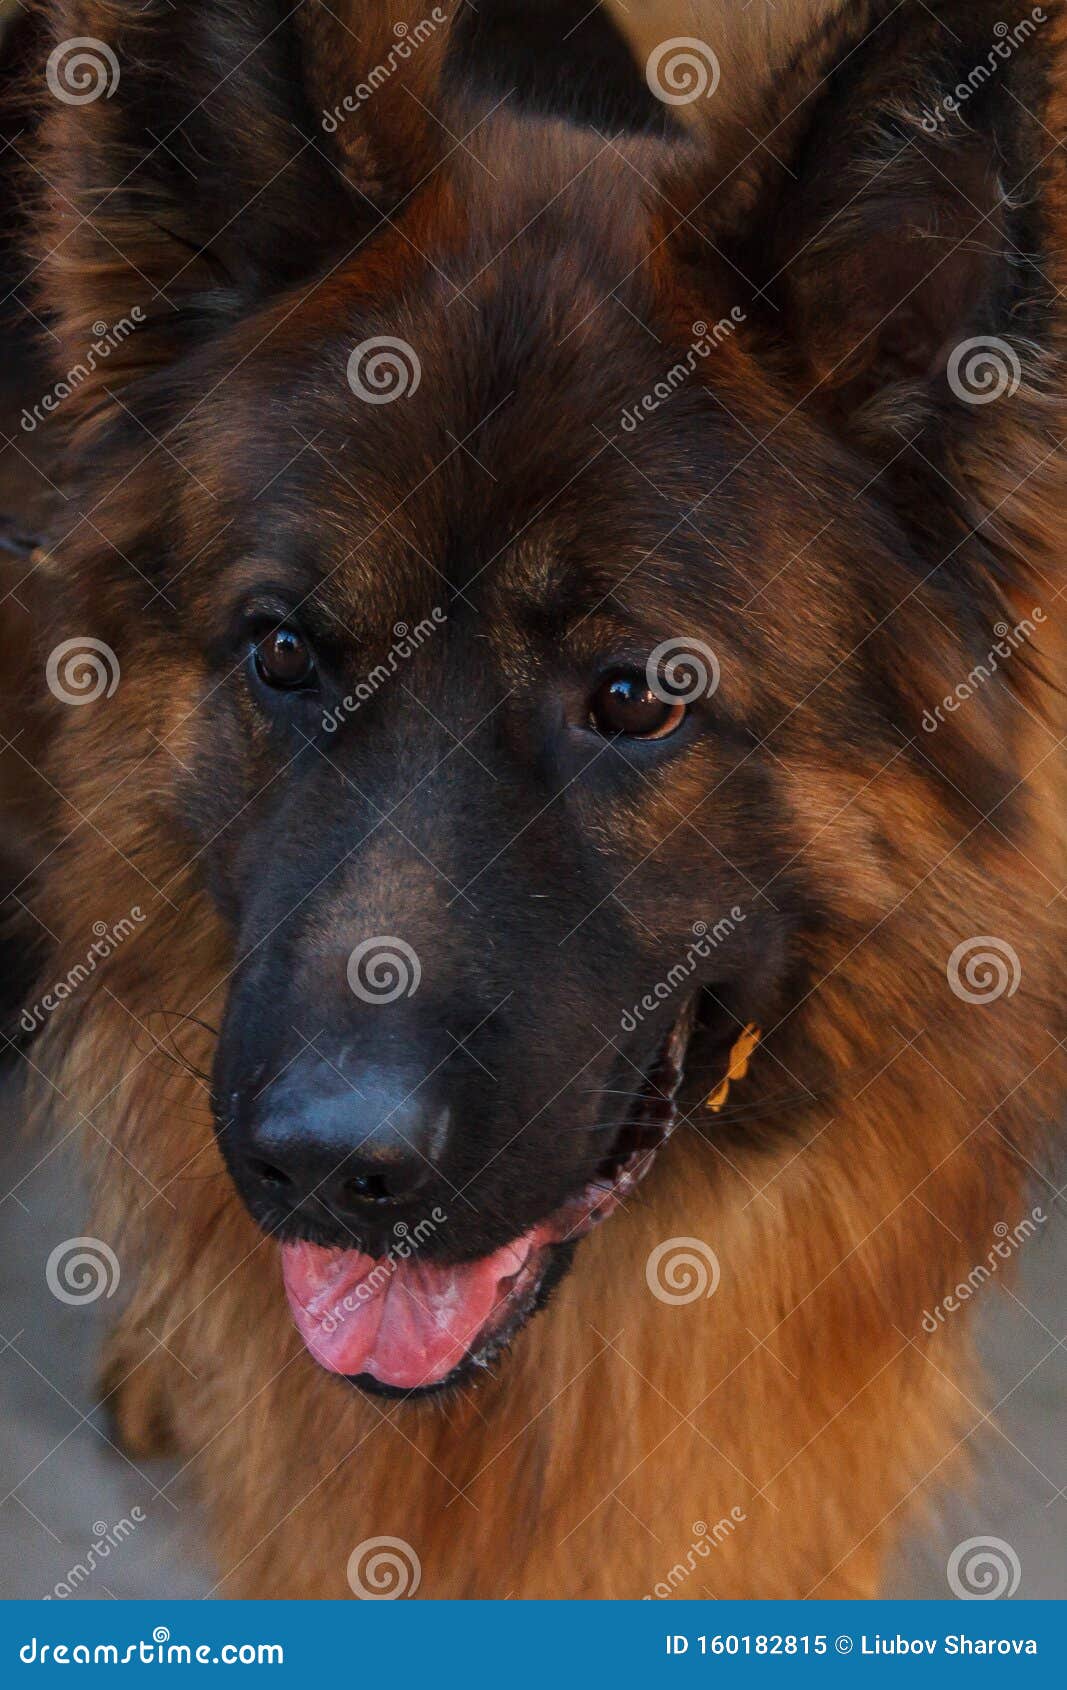 the german shepherd is one of the most popular and recognizable dog breeds on the planet.